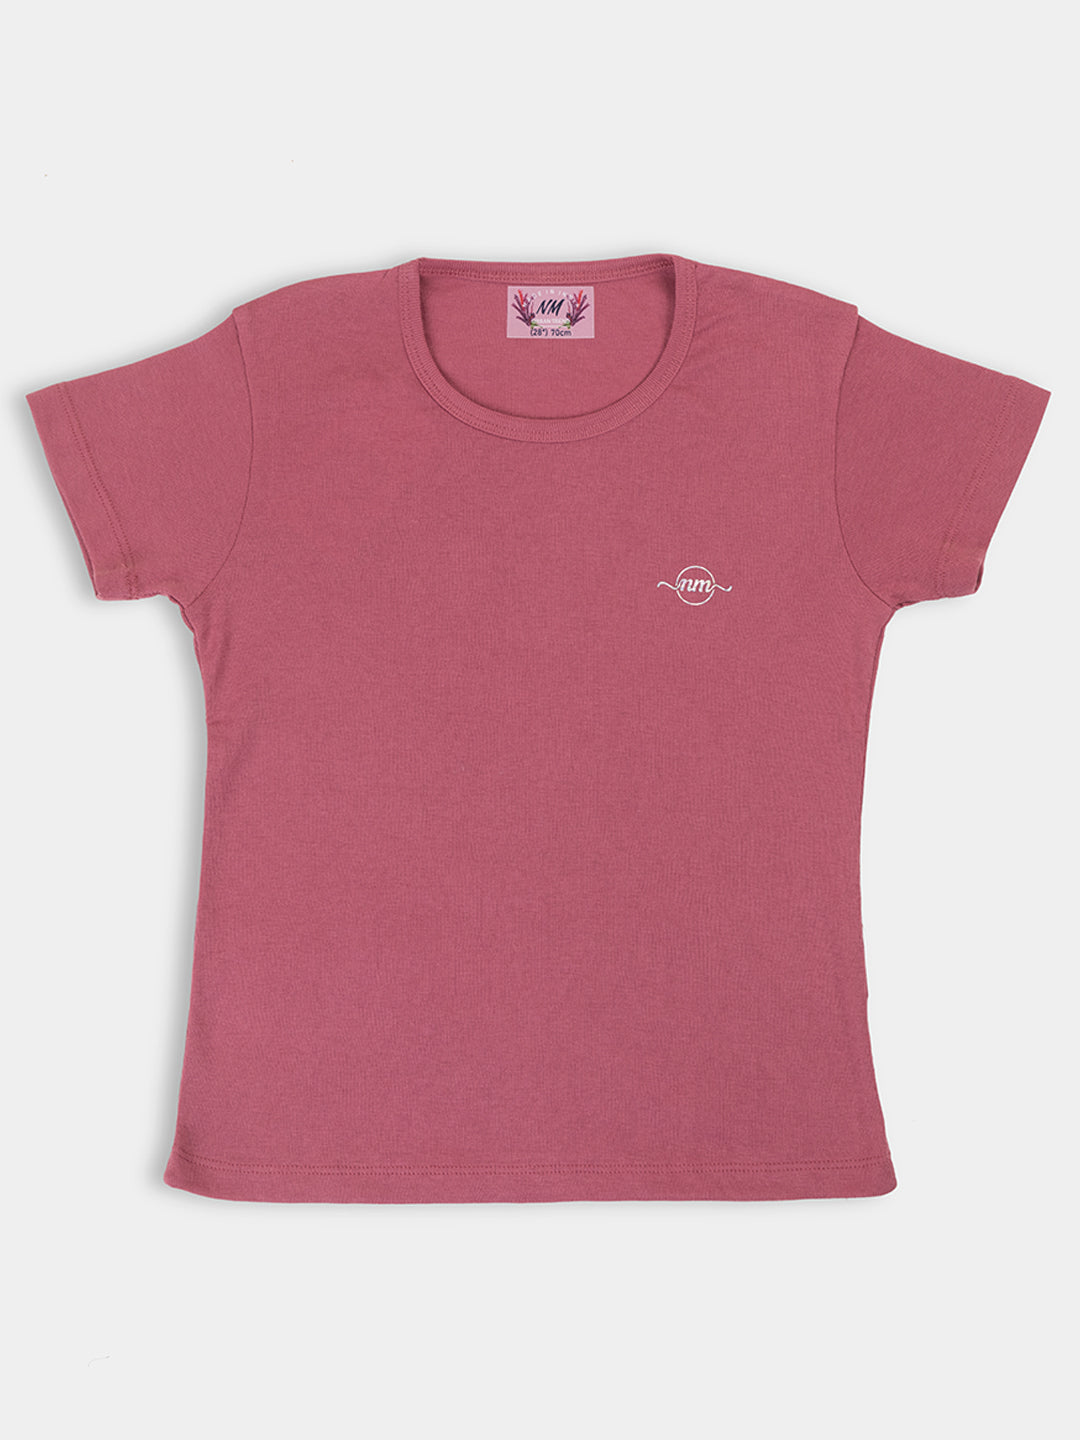 Adorable Girls' Half Sleeve Top 3-Combo: Solid Colors